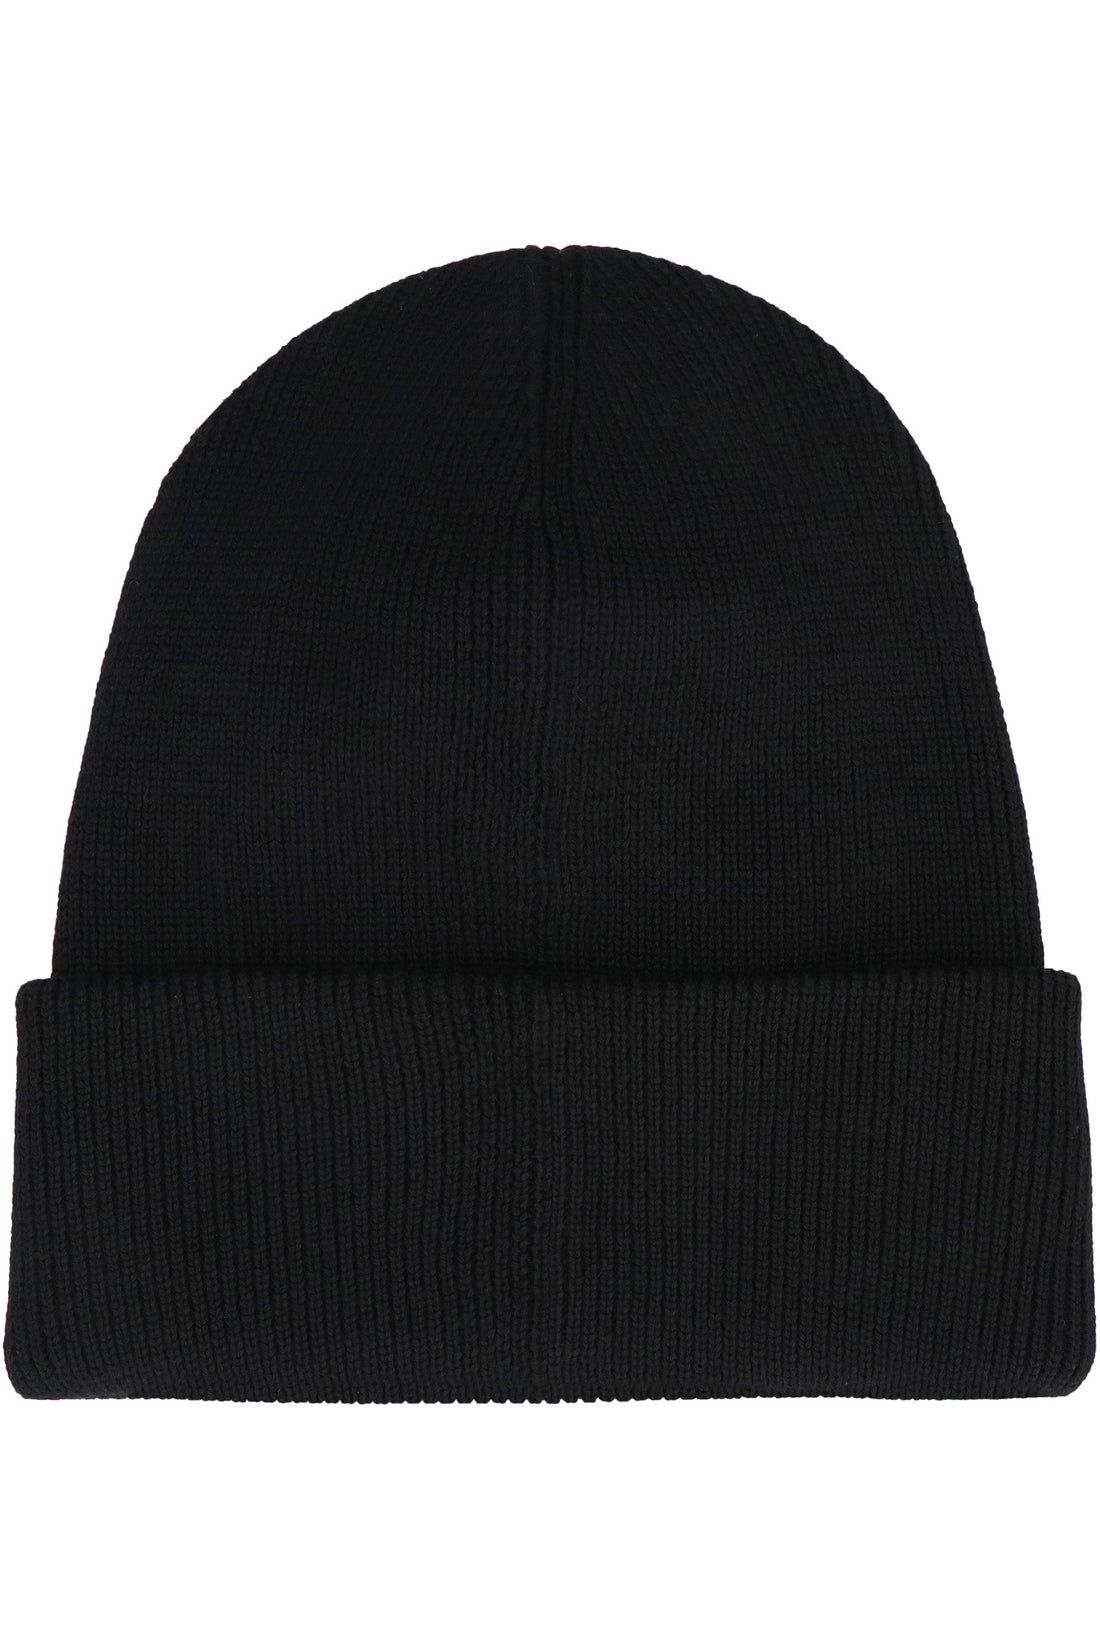 Canada Goose-OUTLET-SALE-Ribbed knit beanie-ARCHIVIST